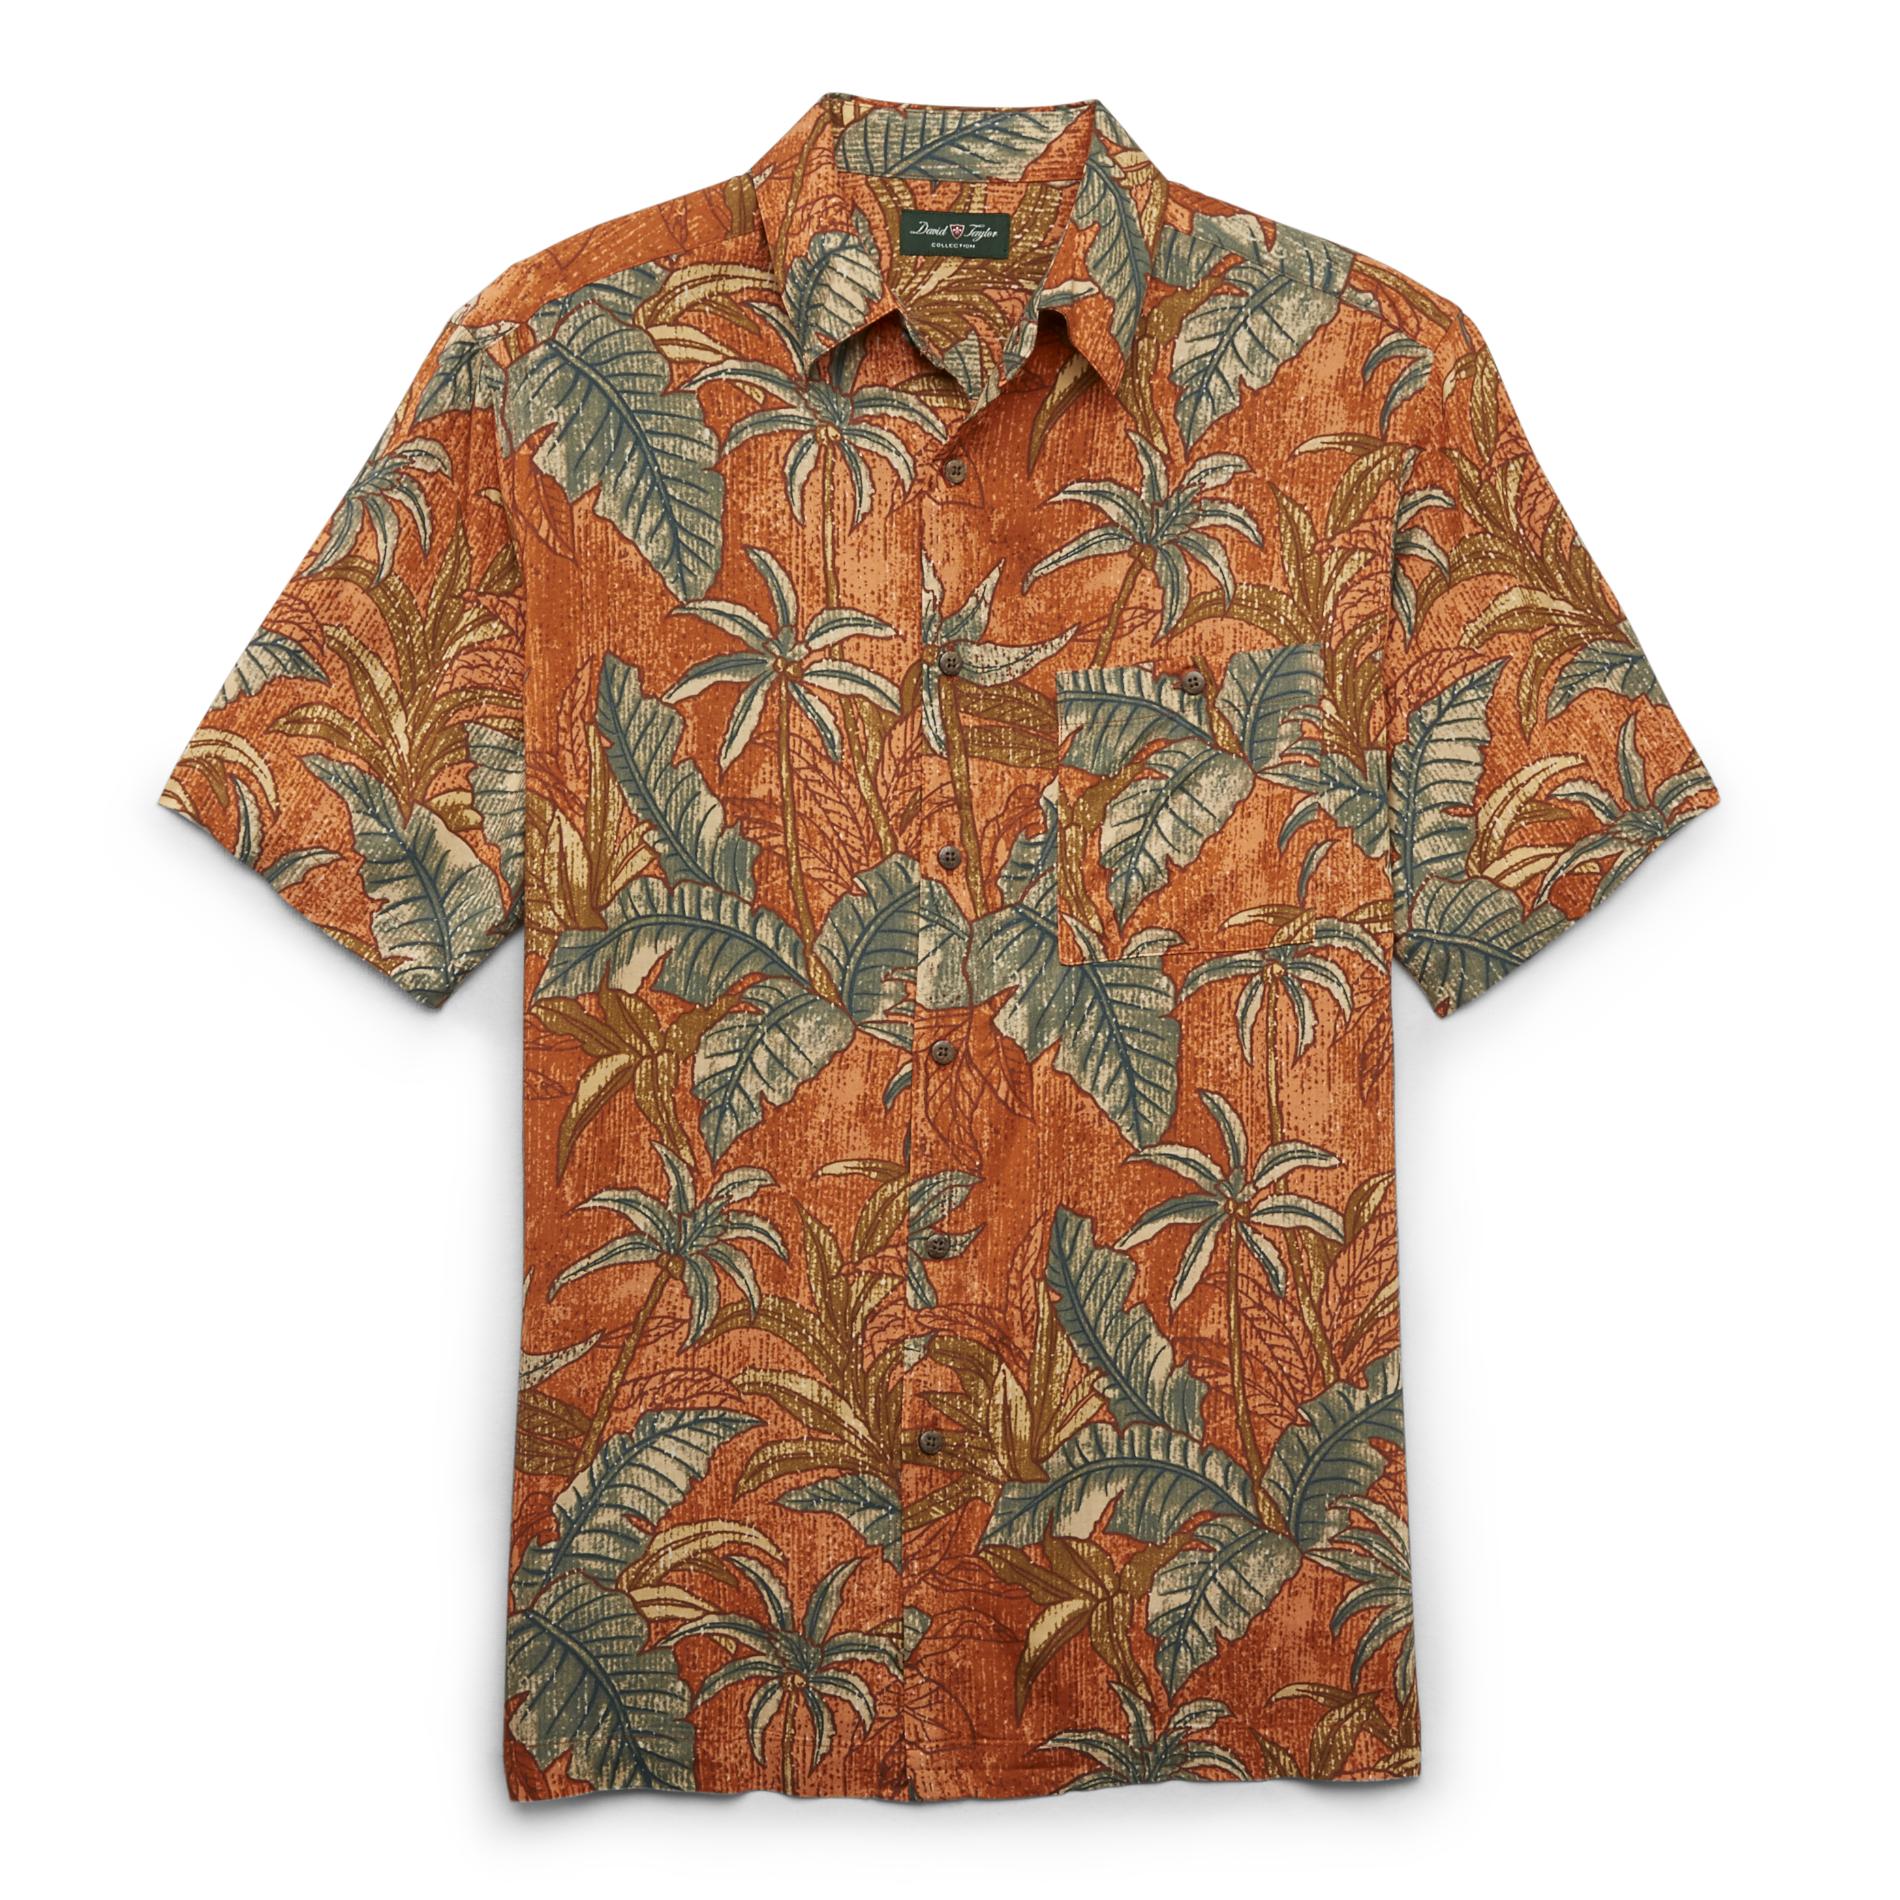 David Taylor Collection Men's Big & Tall Short-Sleeve Button-Front Shirt - Ferns & Palm Trees